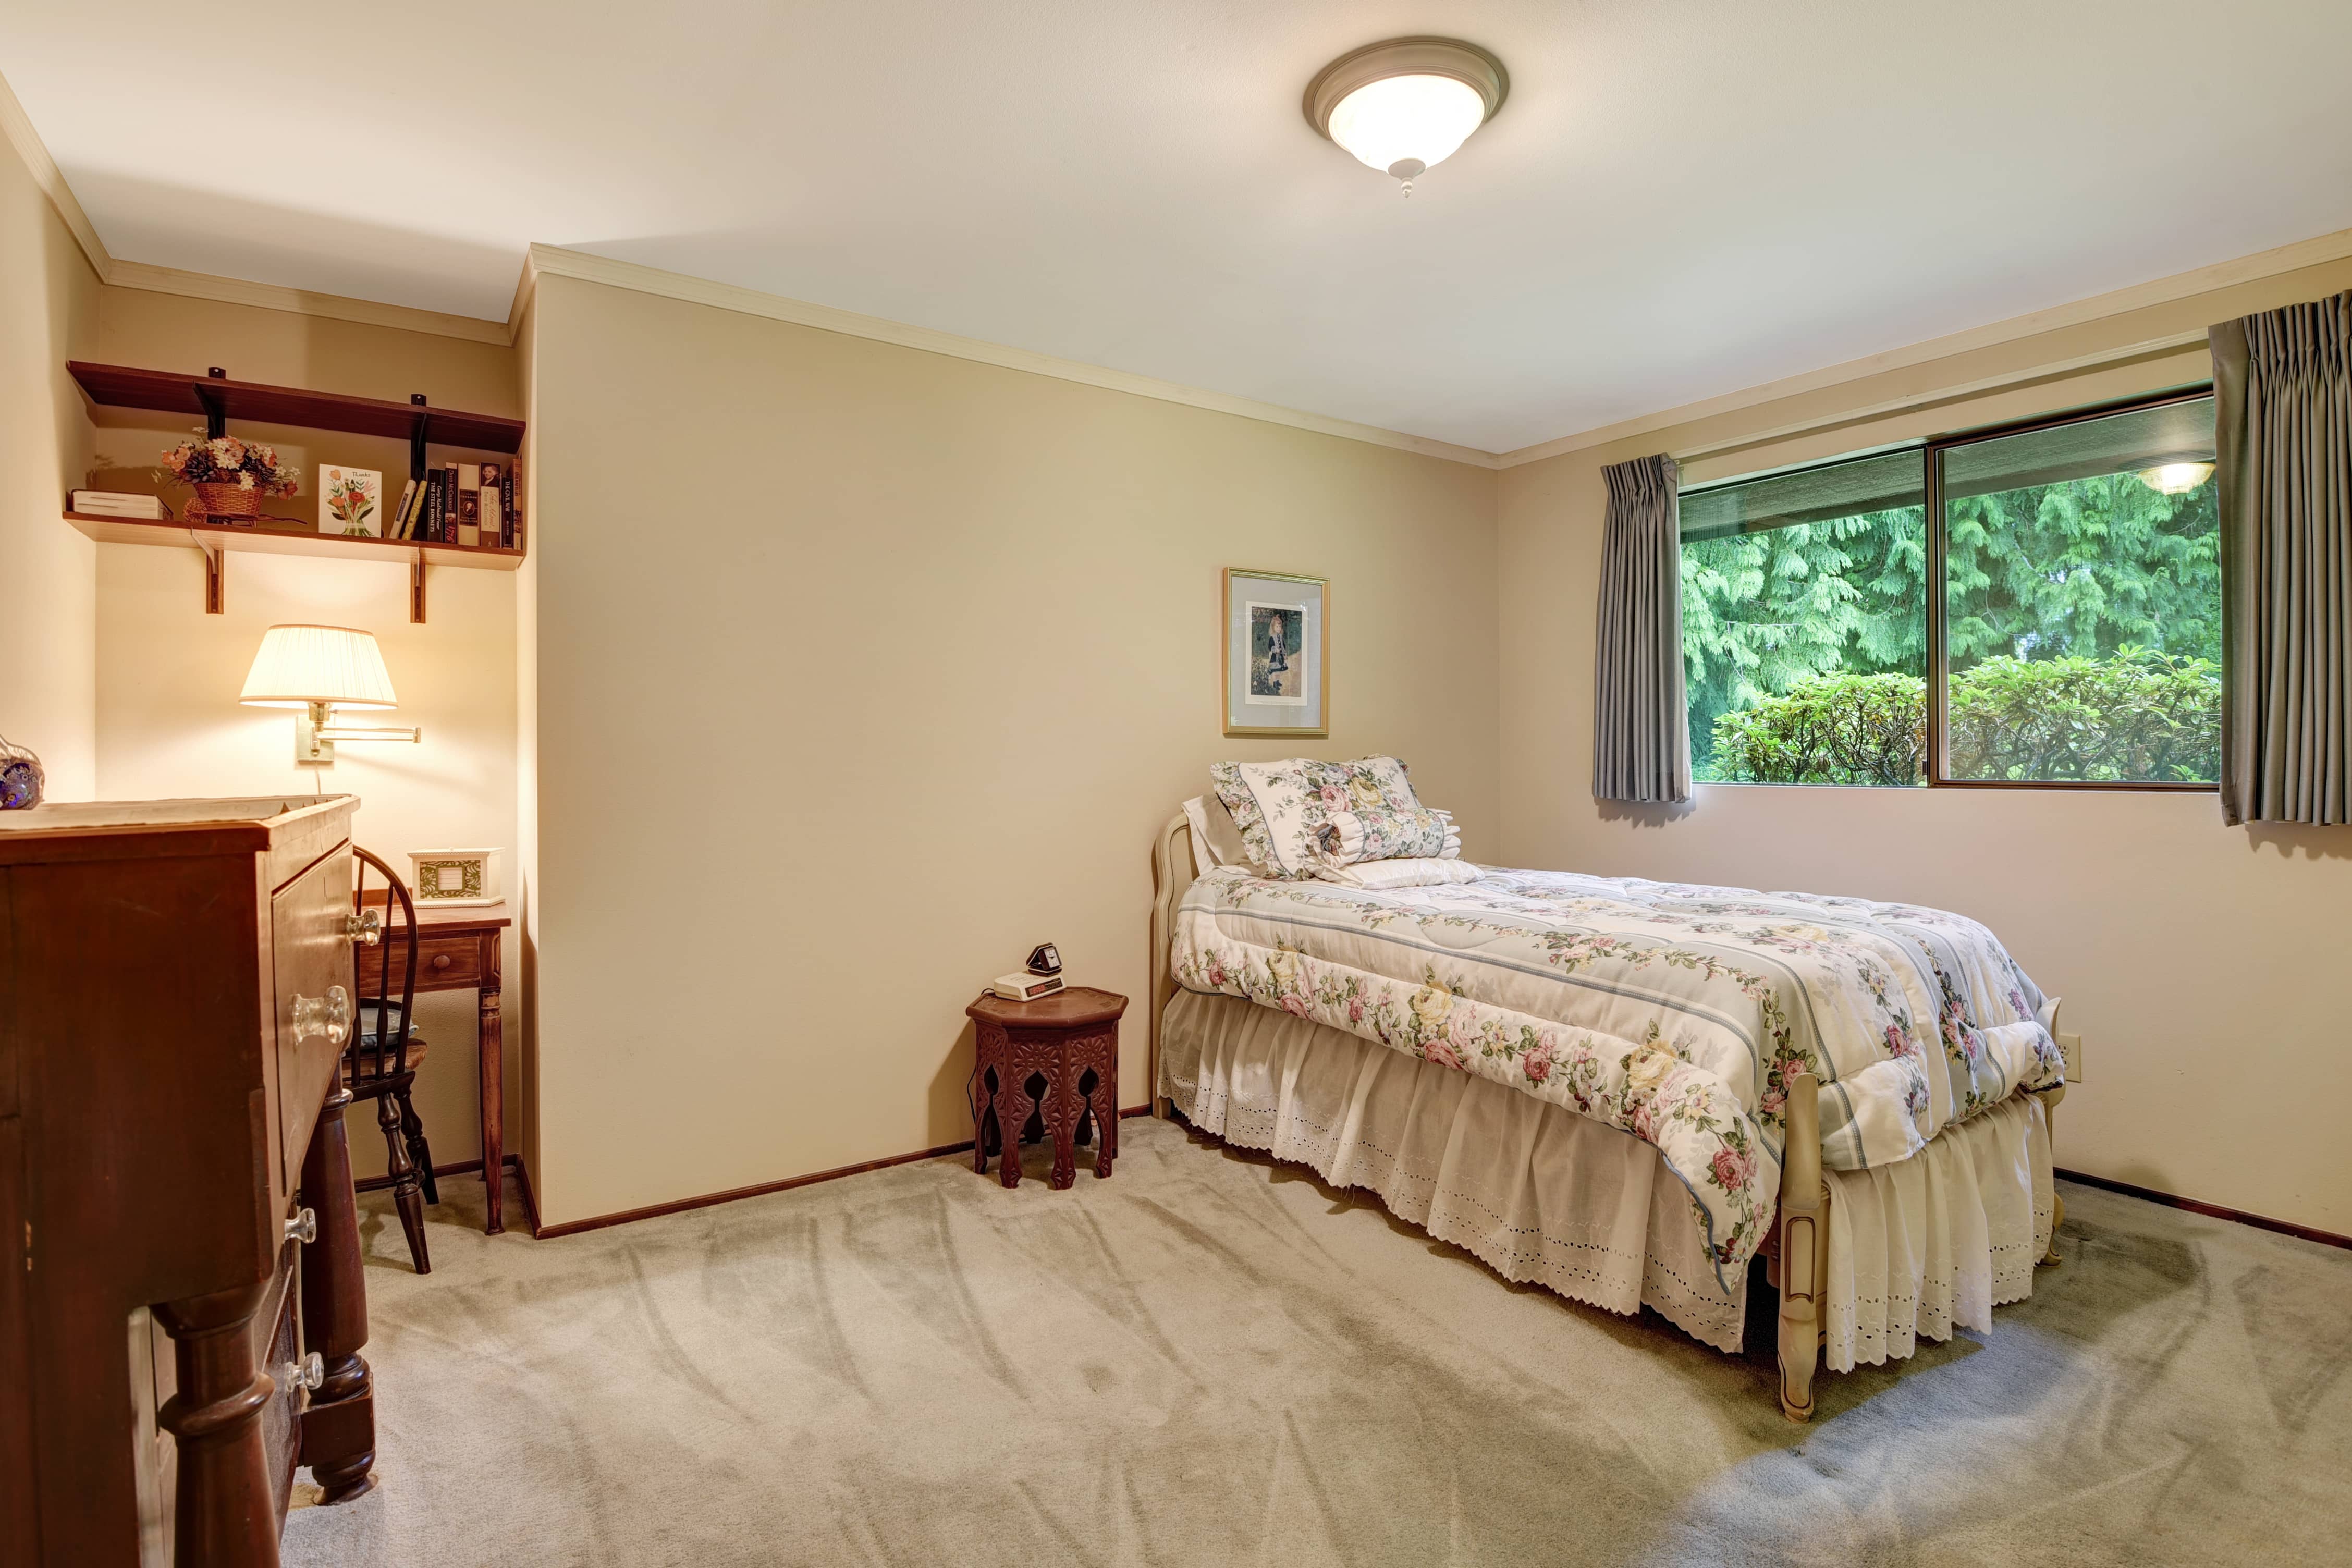 Guest bedroom before and after virtual home staging